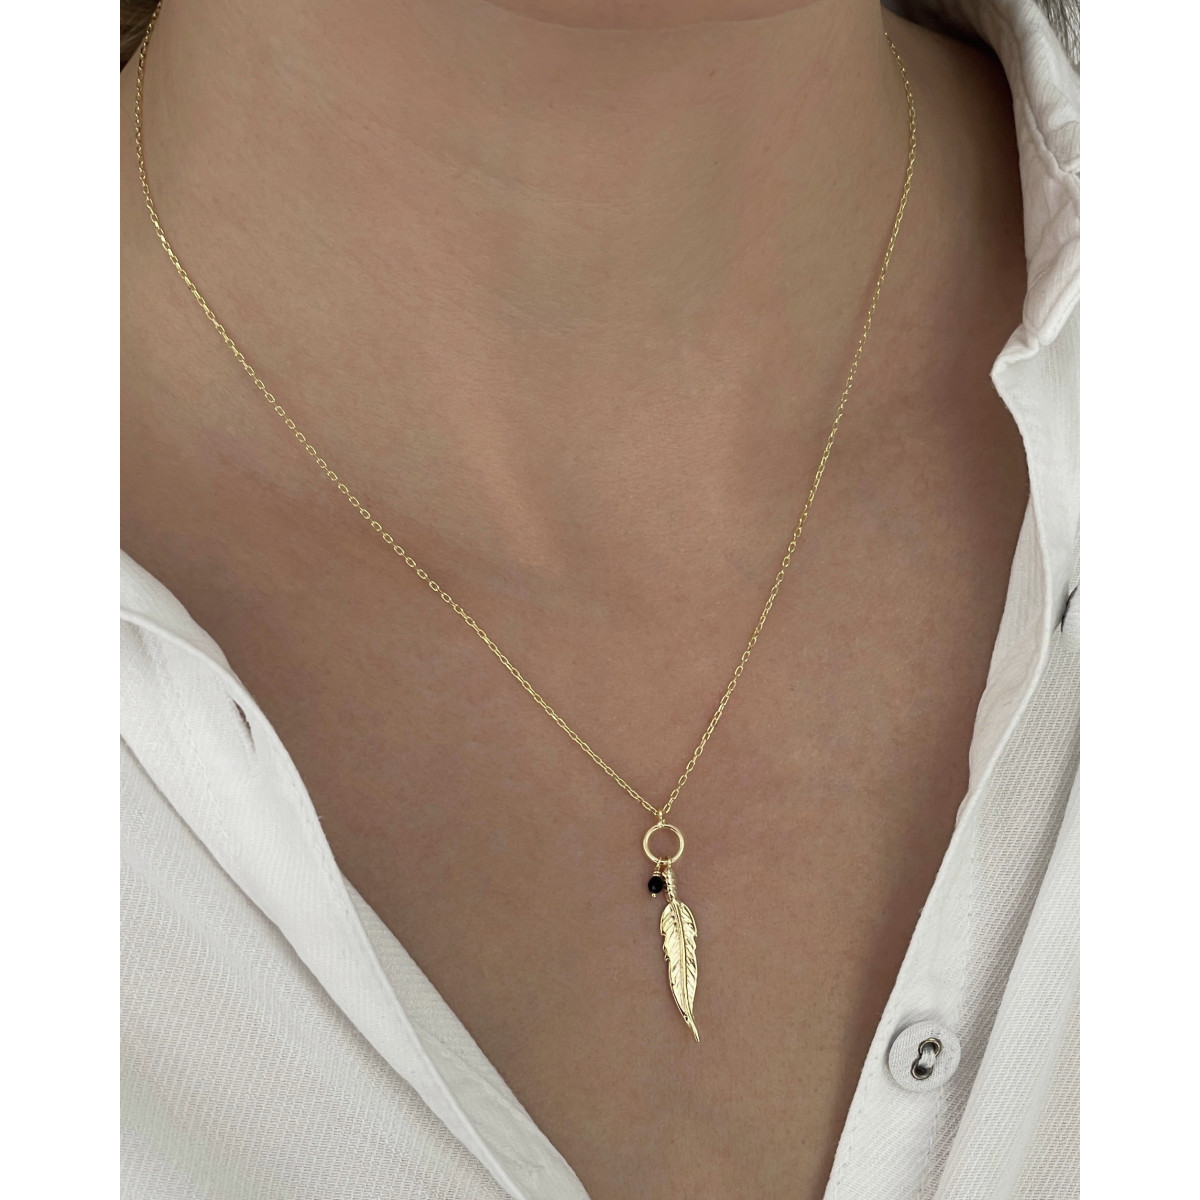 FEATHER WITH BLACK BEAD PENDANT NECKLACE